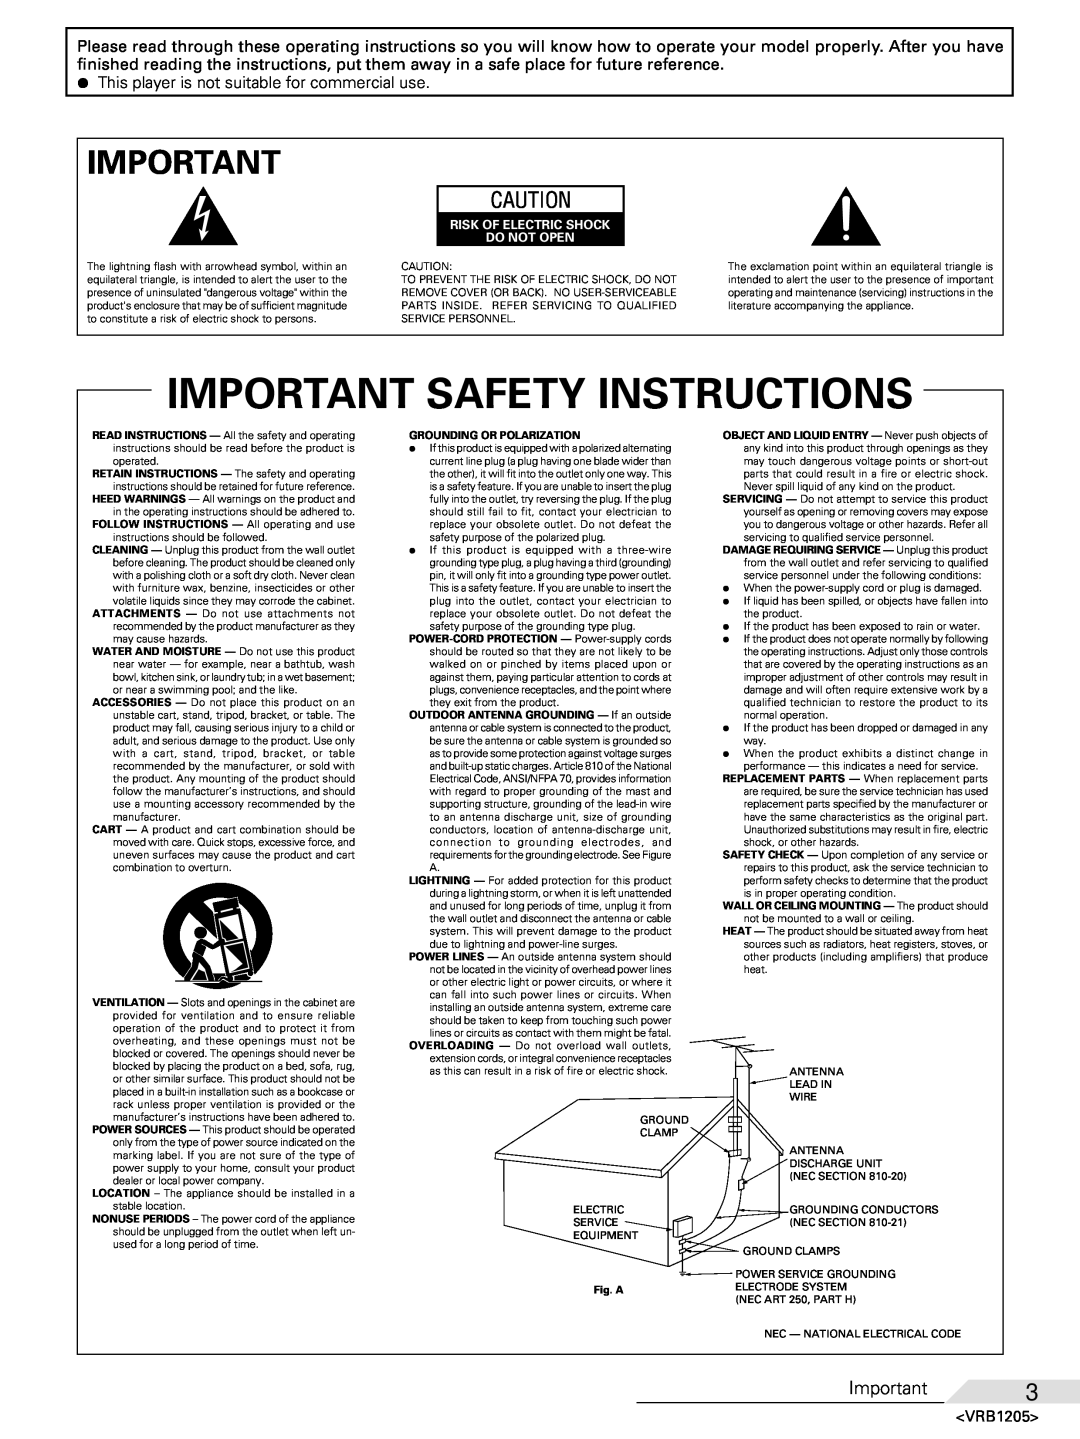 Pioneer DV-05 operating instructions Important Safety Instructions, Important3, Risk Of Electric Shock Do Not Open 